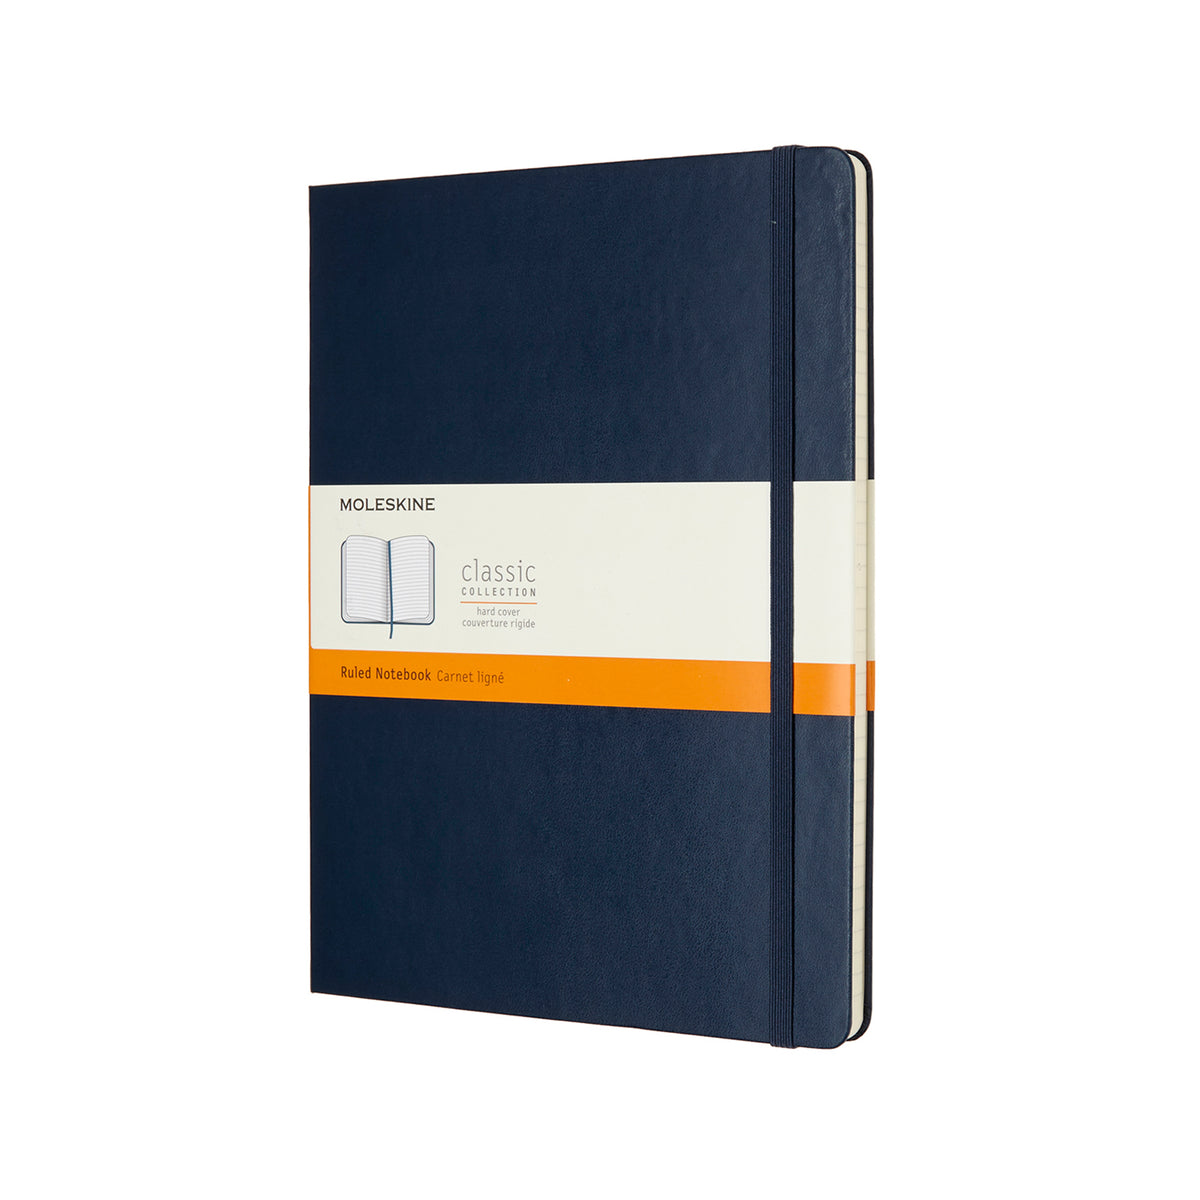 Moleskine - Classic Hard Cover Notebook - Ruled - Extra Large - Sapphire Blue